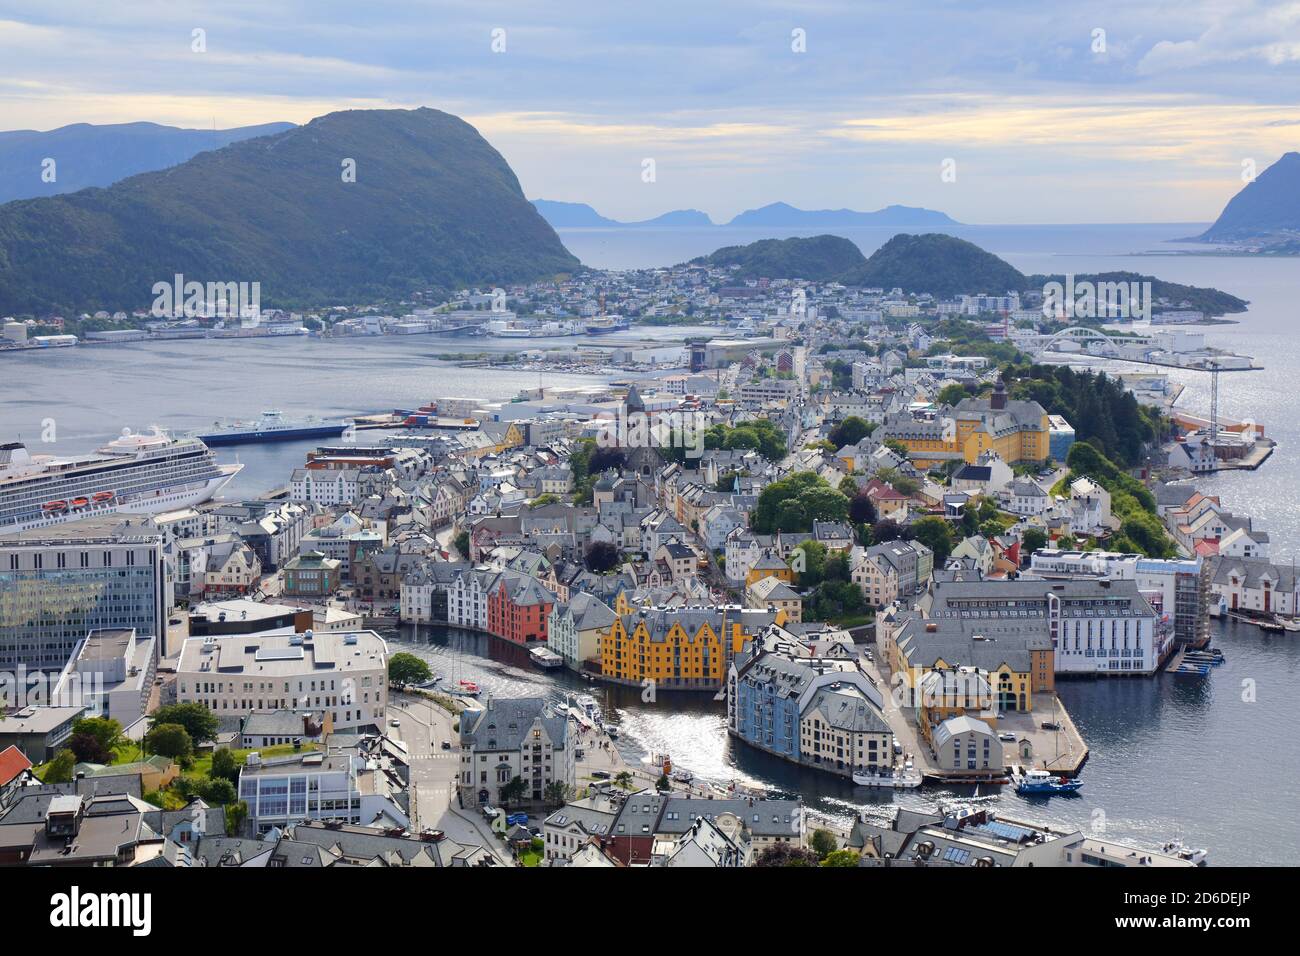 Alesund city, Norway. Aerial view from Aksla mountain. Stock Photo